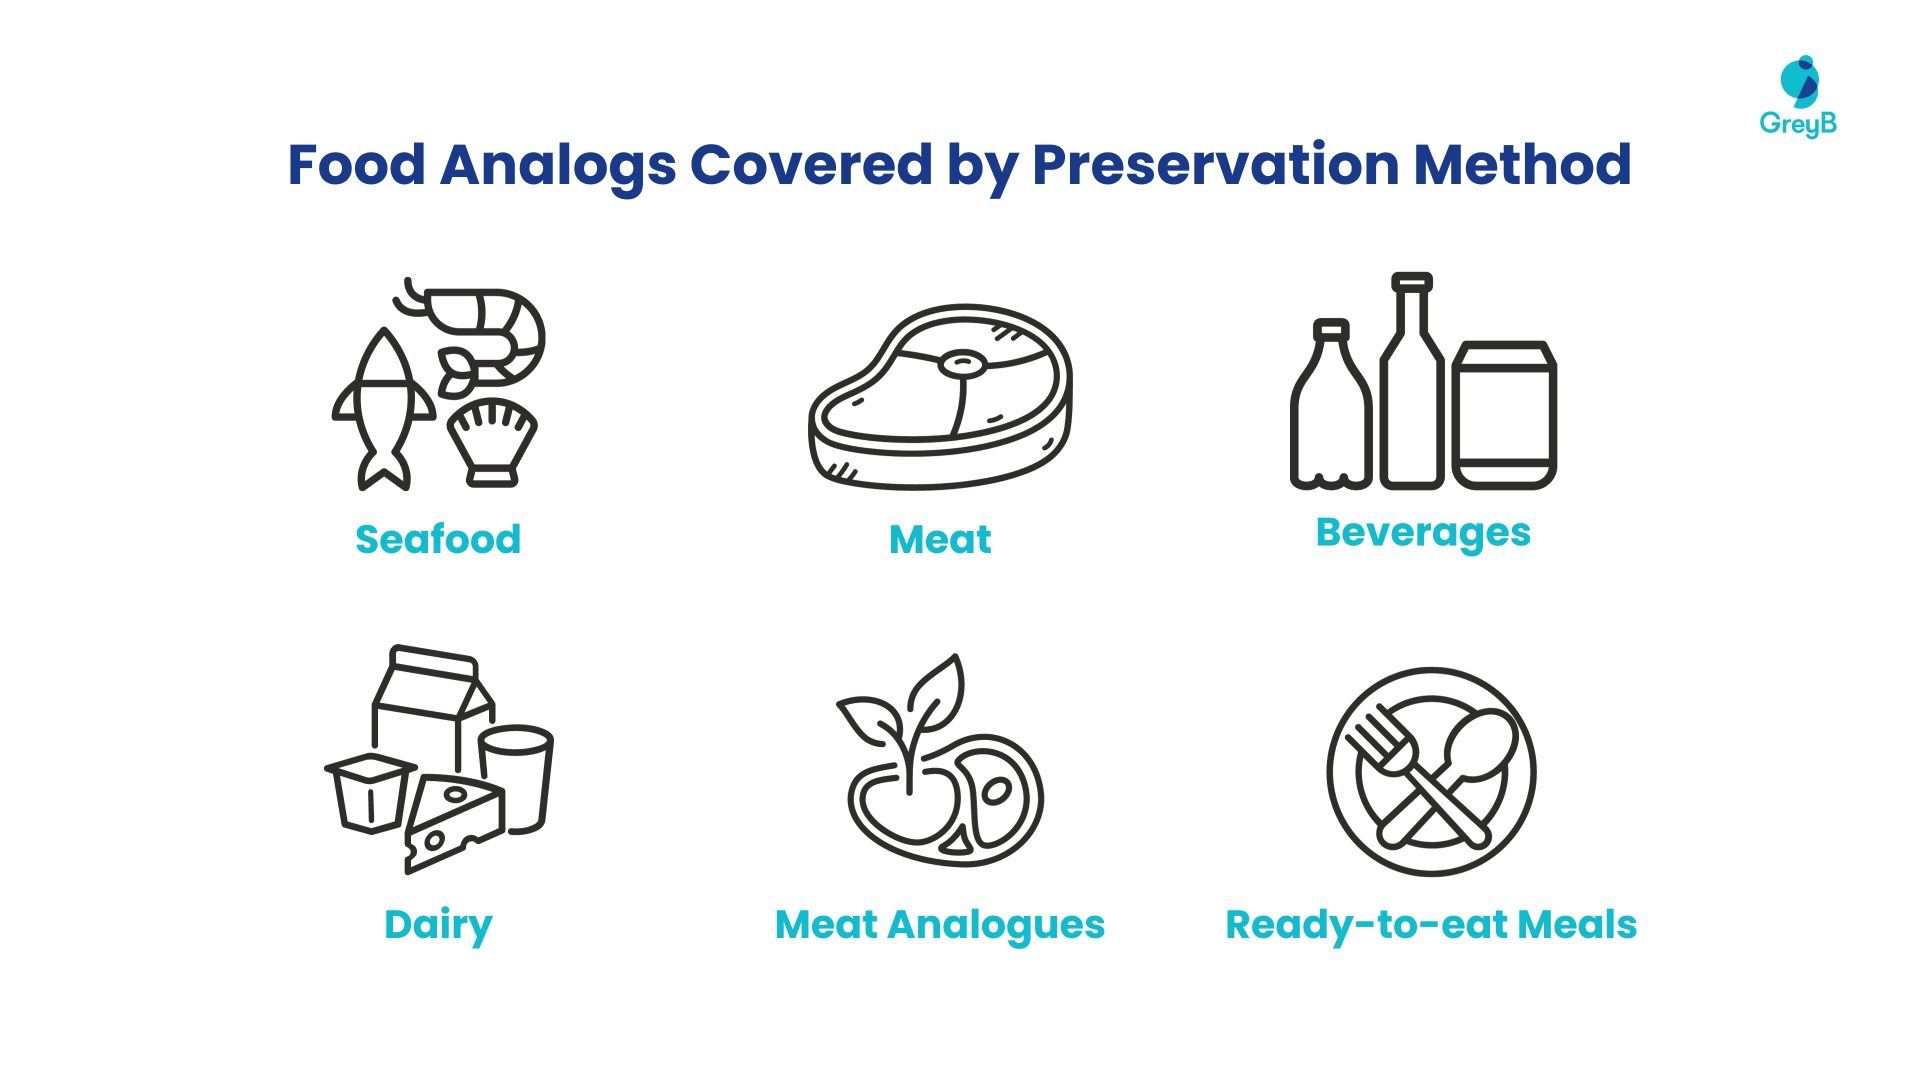 Food Analogs Covered by Preservation Method